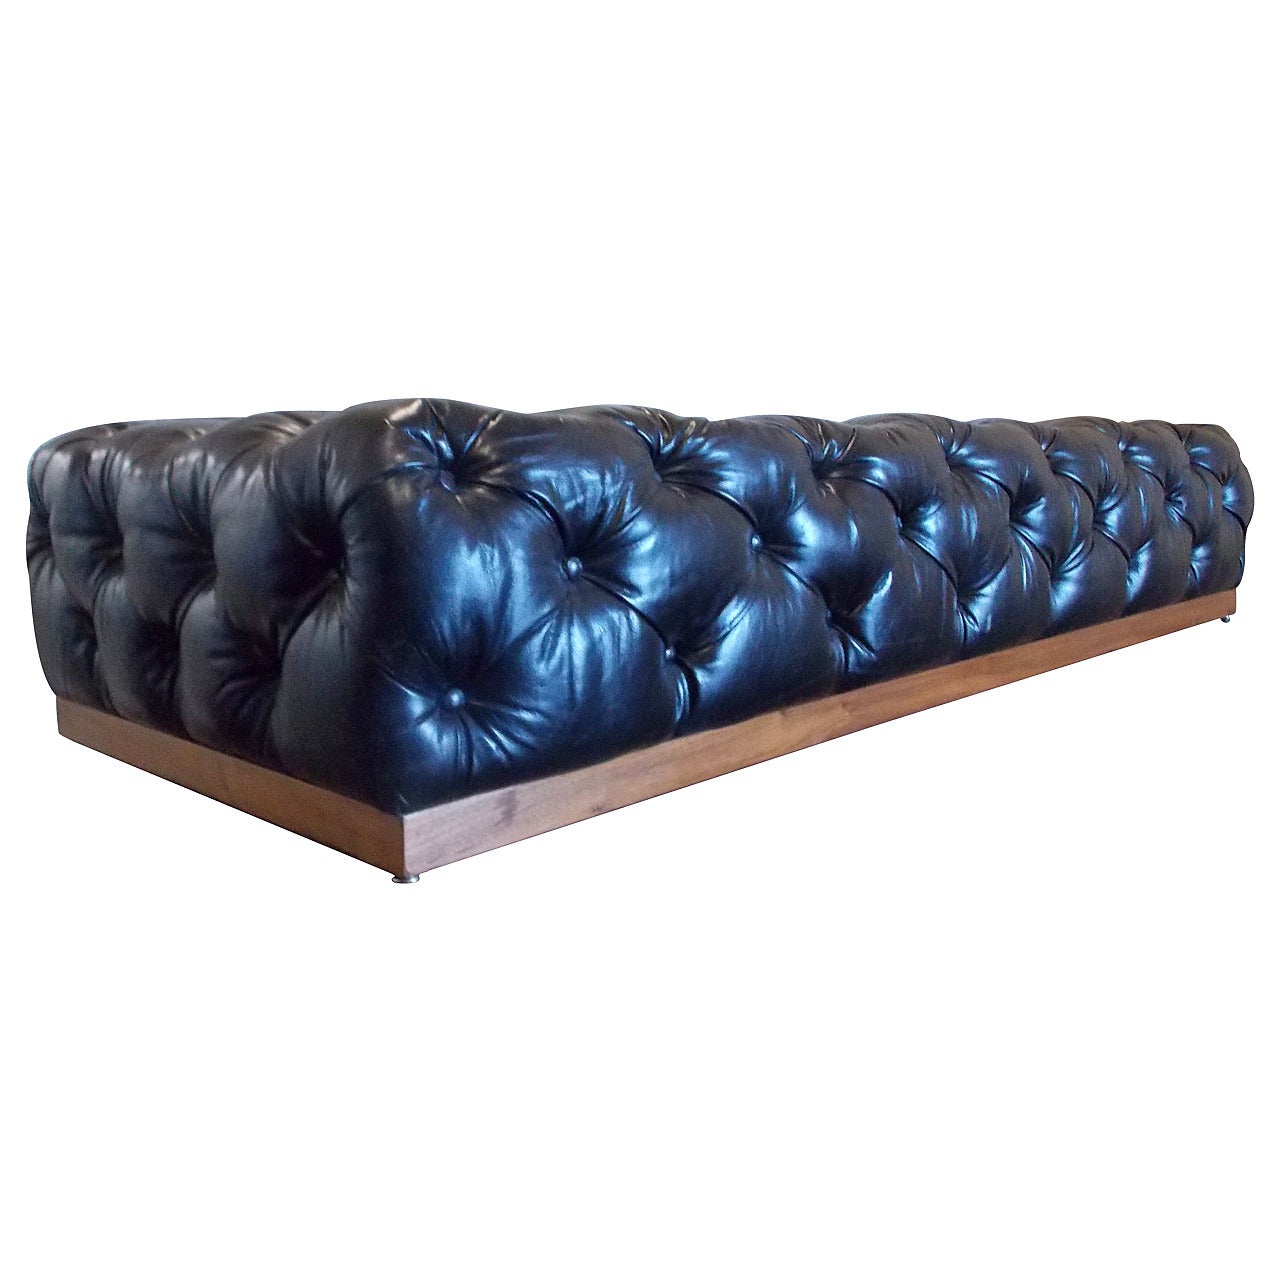 Milo Baughman Leather Chesterfield Bench or Daybed